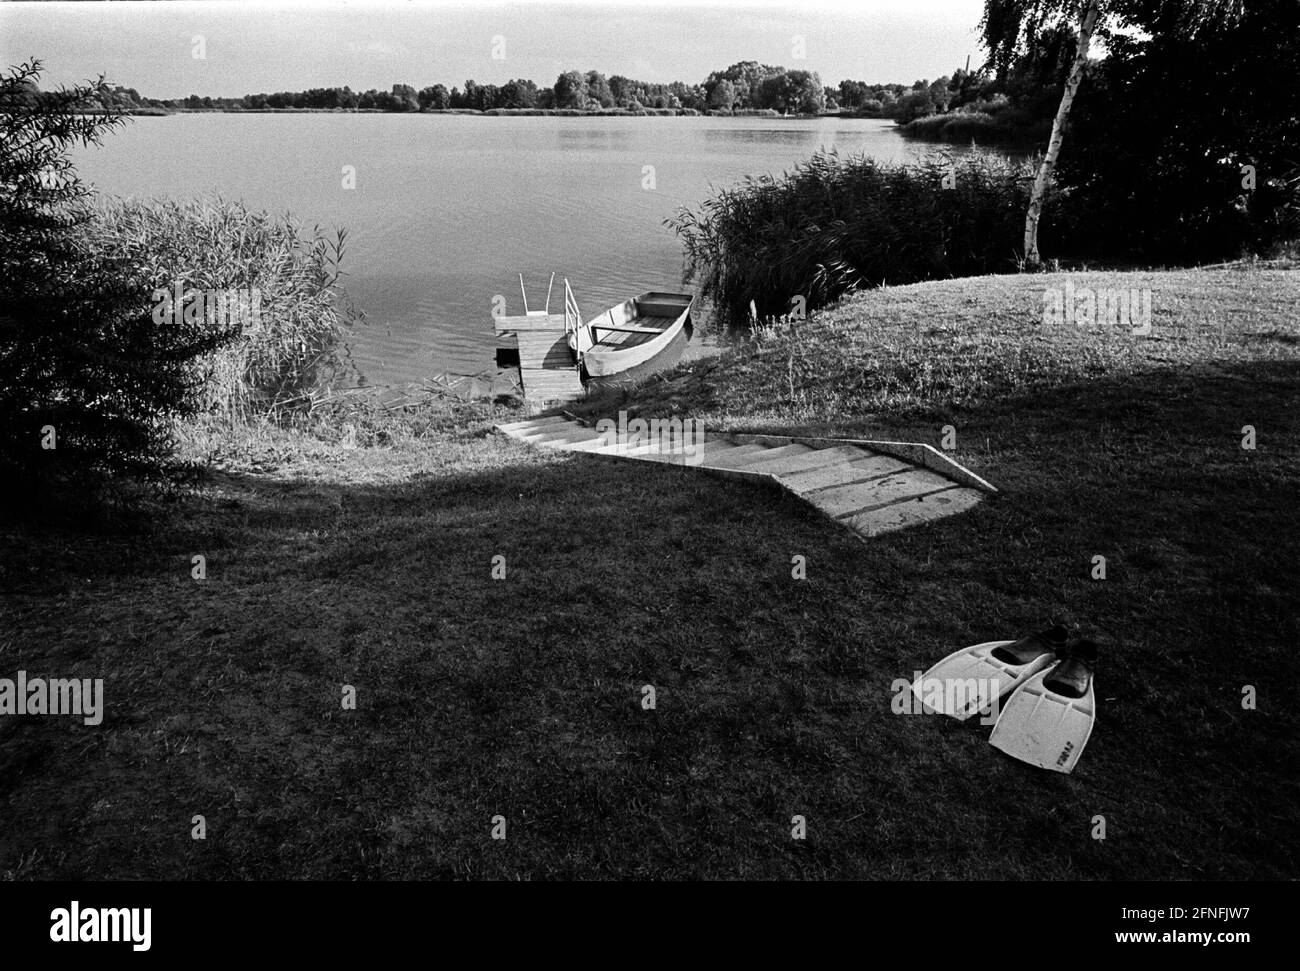 '''Tonsee'' near Zehdenick, where once the clay for e.g.: the Prenzlauer Berg was dredged, beautiful bathing lakes were created, nearby the disused and converted to a museum brickworks near Mildenberg, Mildenberg, 09.08.1999, [automated translation]' Stock Photo